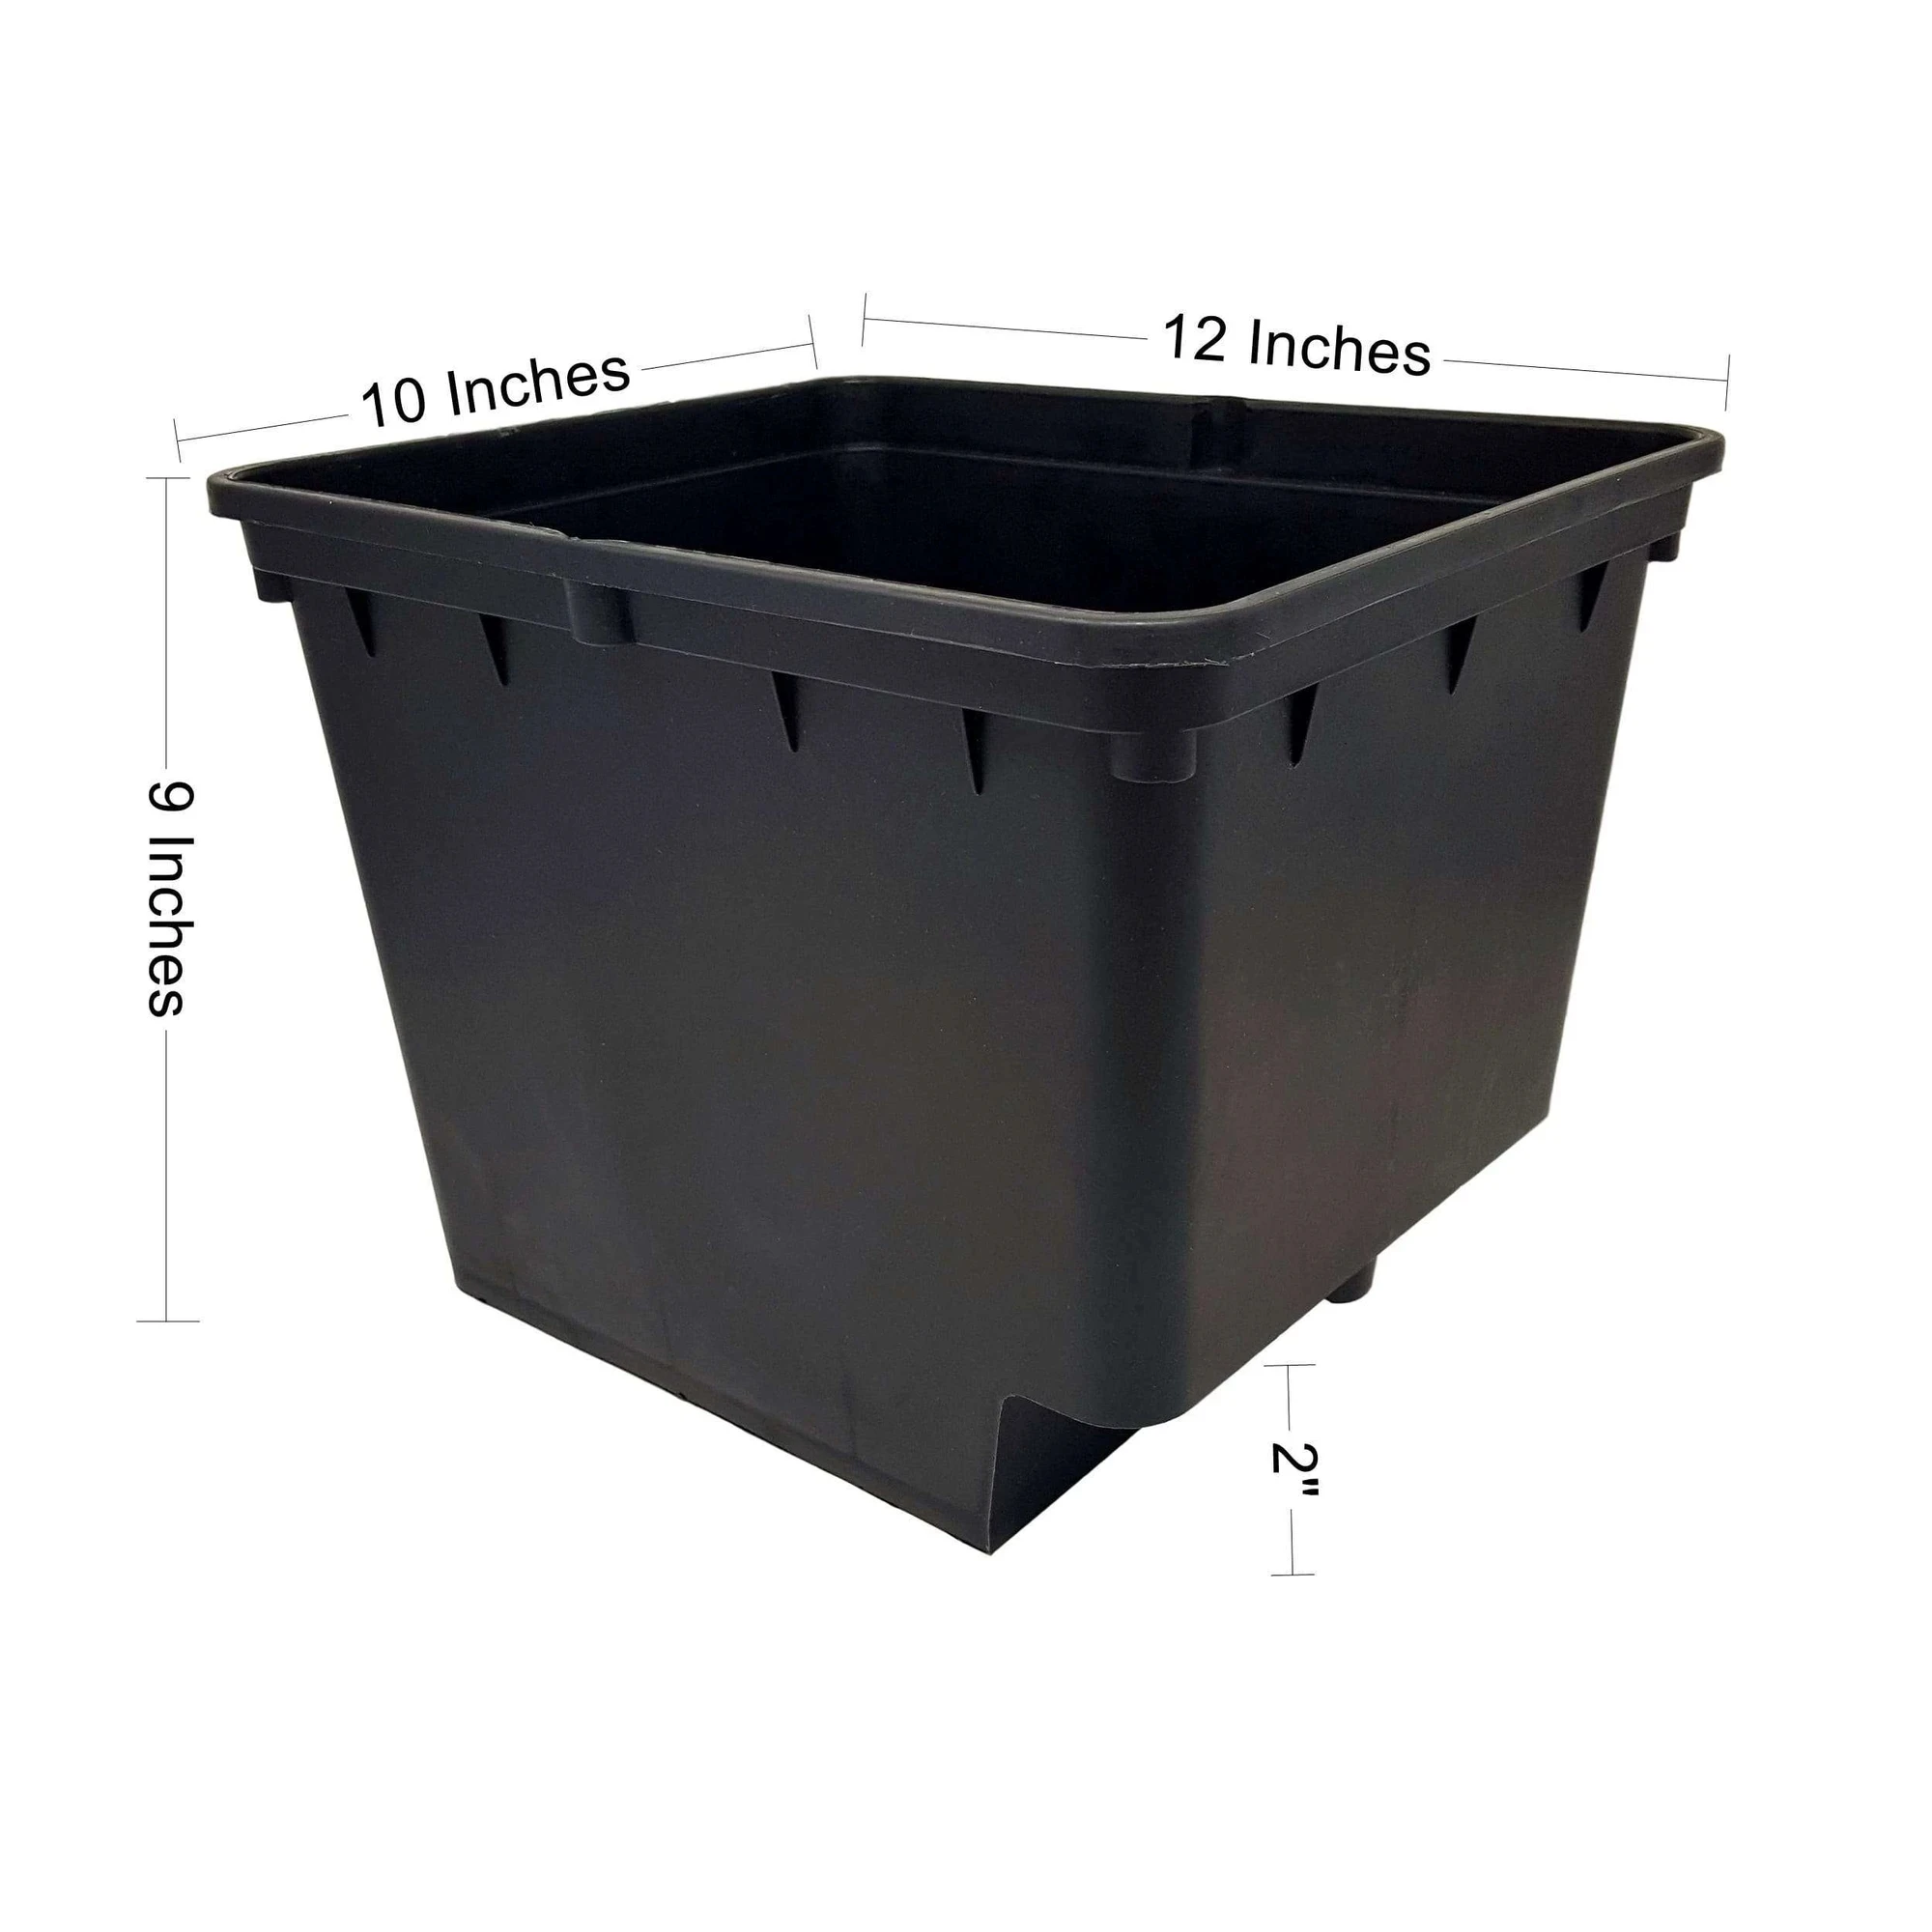 

Skyplant Factory hot sales Dutch Bucket for Greenhouse hydroponic planting system, Beige or black/customize